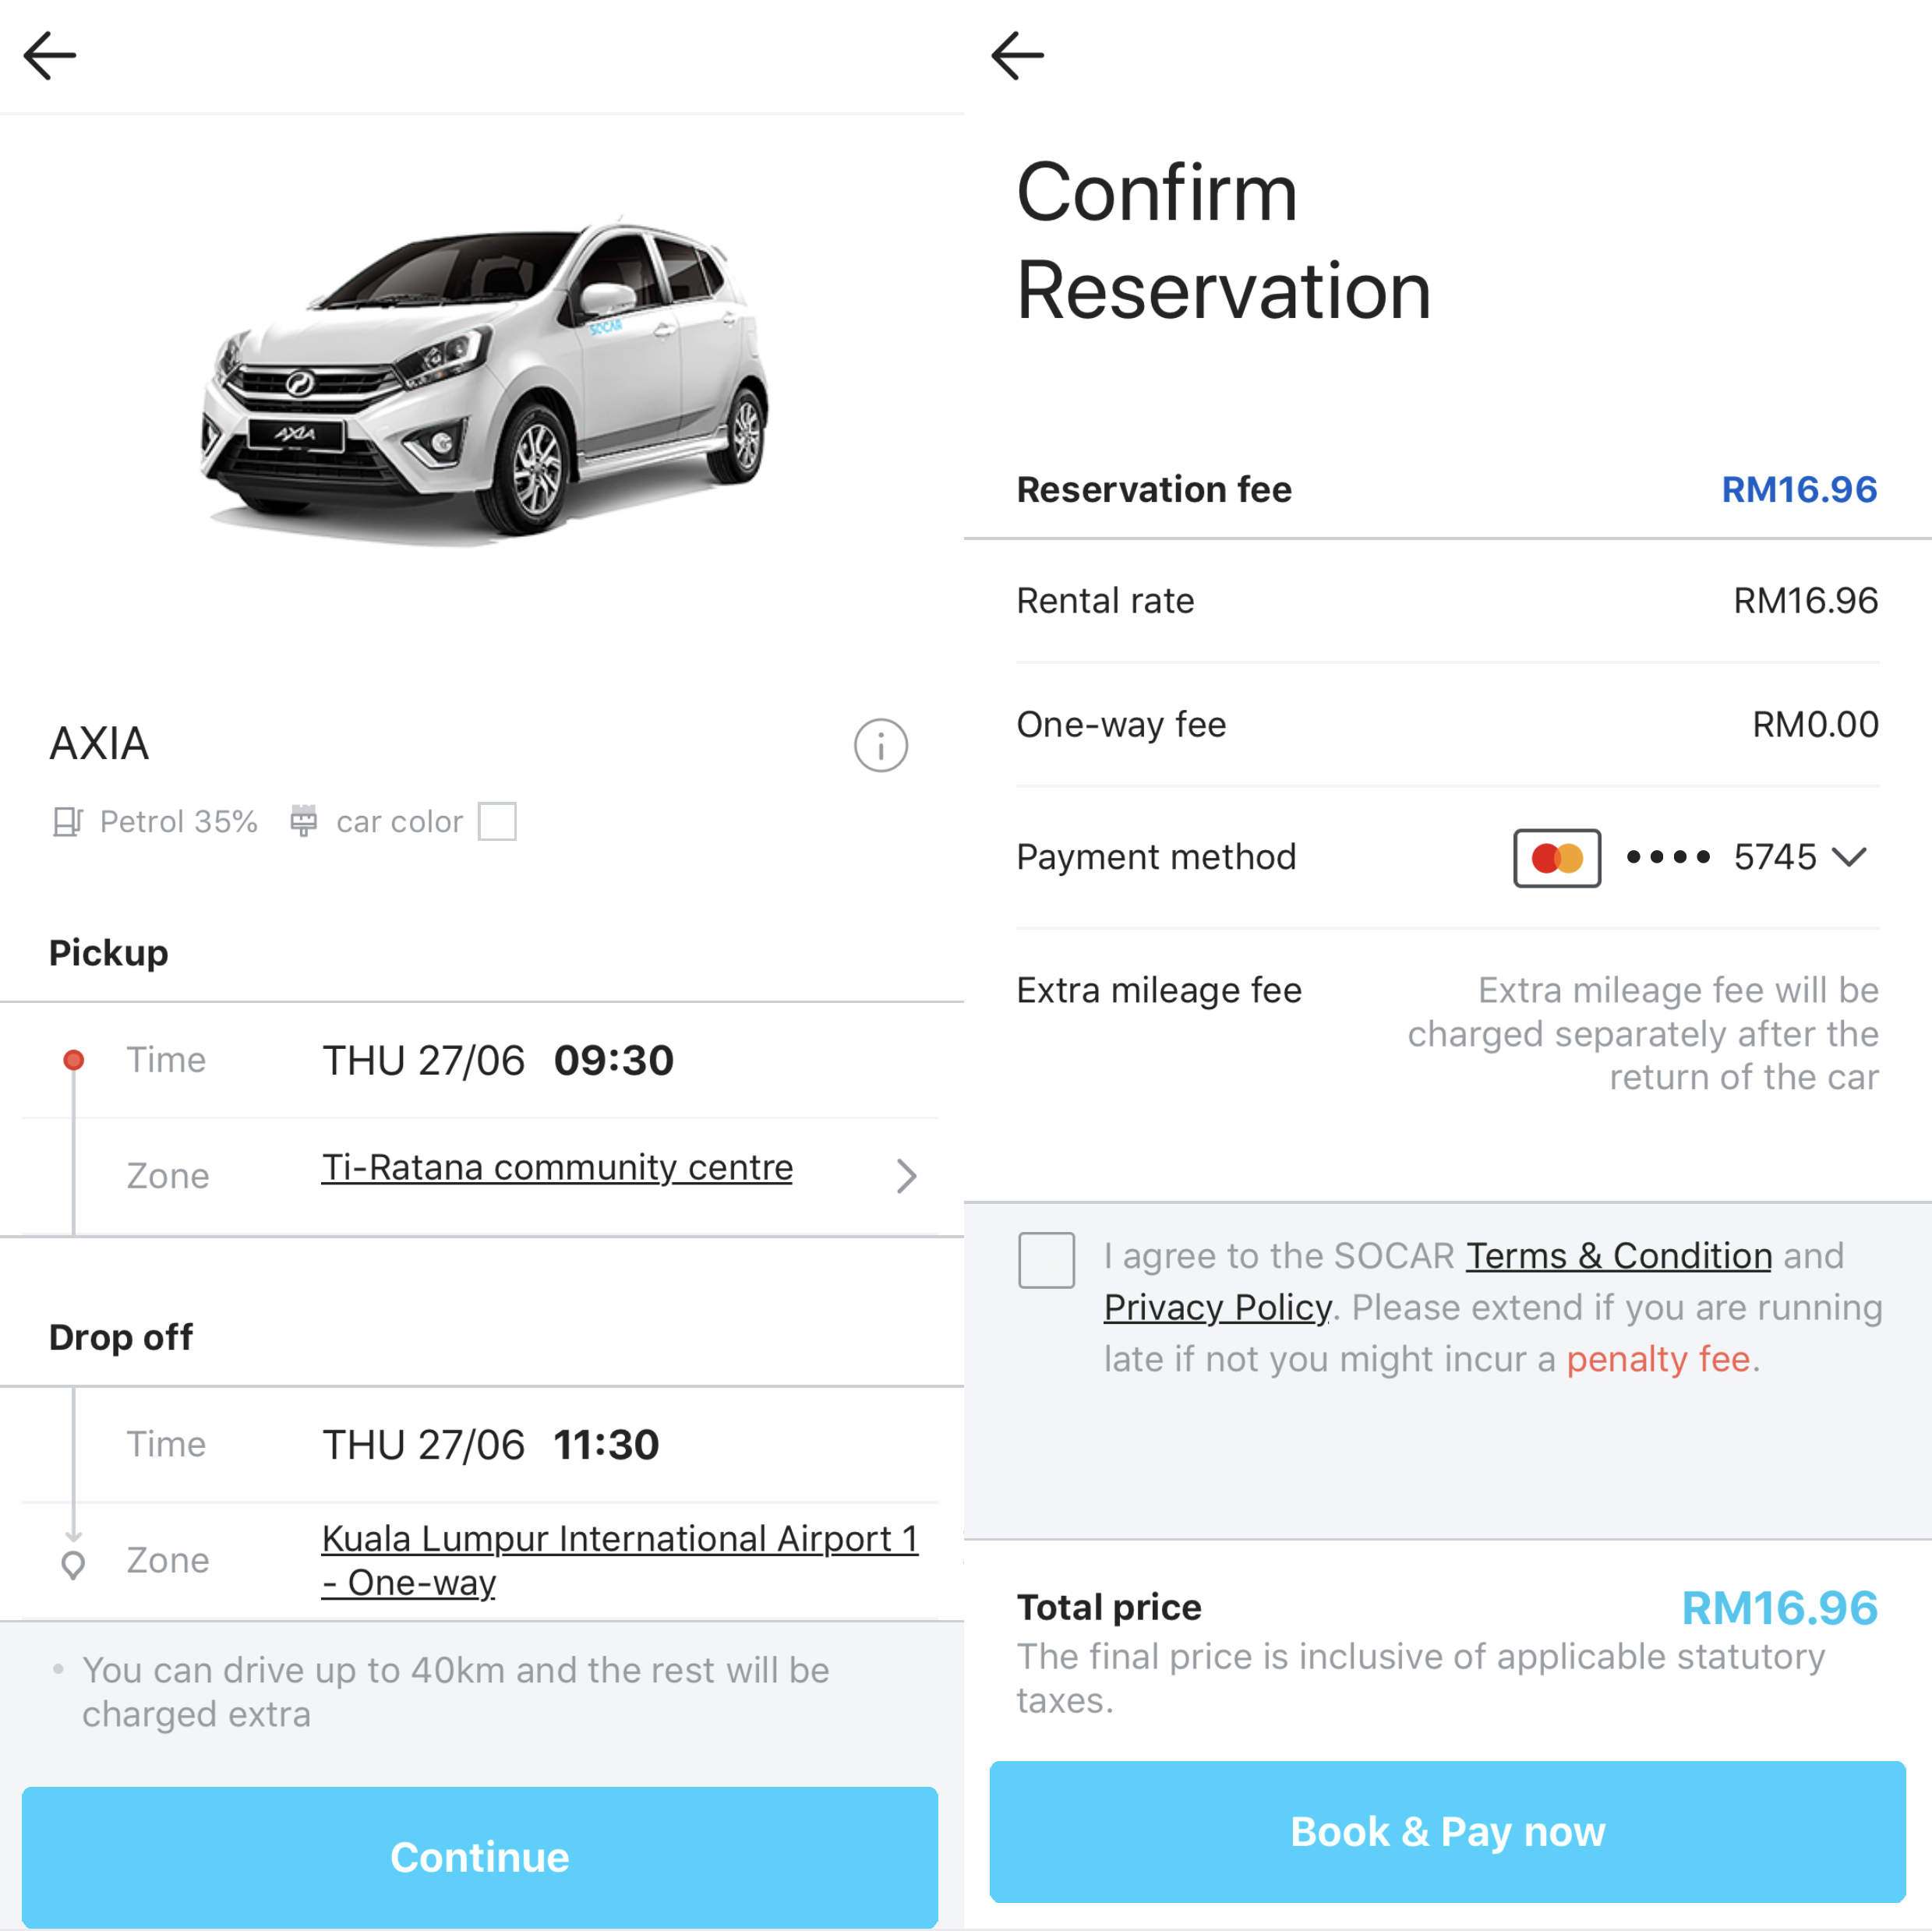 SOCAR lets you book a one-way trip to KLIA from as little 